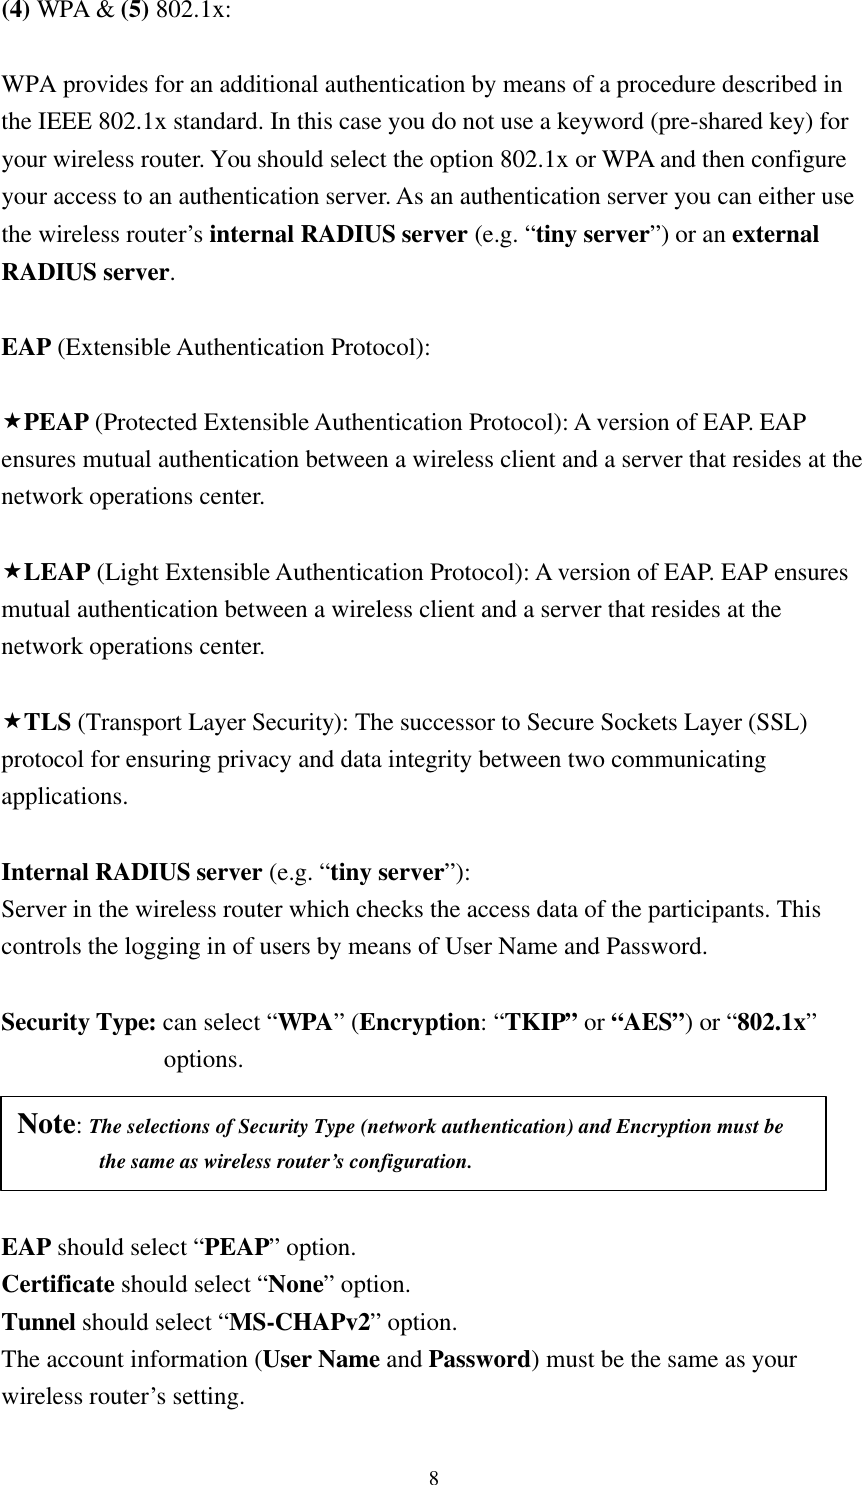 8 (4) WPA &amp; (5) 802.1x:  WPA provides for an additional authentication by means of a procedure described in the IEEE 802.1x standard. In this case you do not use a keyword (pre-shared key) for your wireless router. You should select the option 802.1x or WPA and then configure your access to an authentication server. As an authentication server you can either use the wireless router’s  internal RADIUS server (e.g. “tiny server”) or an external RADIUS server.  EAP (Extensible Authentication Protocol):    «PEAP (Protected Extensible Authentication Protocol): A version of EAP. EAP ensures mutual authentication between a wireless client and a server that resides at the network operations center.  «LEAP (Light Extensible Authentication Protocol): A version of EAP. EAP ensures mutual authentication between a wireless client and a server that resides at the network operations center.  «TLS (Transport Layer Security): The successor to Secure Sockets Layer (SSL) protocol for ensuring privacy and data integrity between two communicating applications.  Internal RADIUS server (e.g. “tiny server”):   Server in the wireless router which checks the access data of the participants. This   controls the logging in of users by means of User Name and Password.  Security Type: can select “WPA” (Encryption: “TKIP” or “AES”) or “802.1x”  options.         EAP should select “PEAP” option.   Certificate should select “None” option.   Tunnel should select “MS-CHAPv2” option. The account information (User Name and Password) must be the same as your   wireless router’s setting. Note: The selections of Security Type (network authentication) and Encryption must be       the same as wireless router’s configuration. 